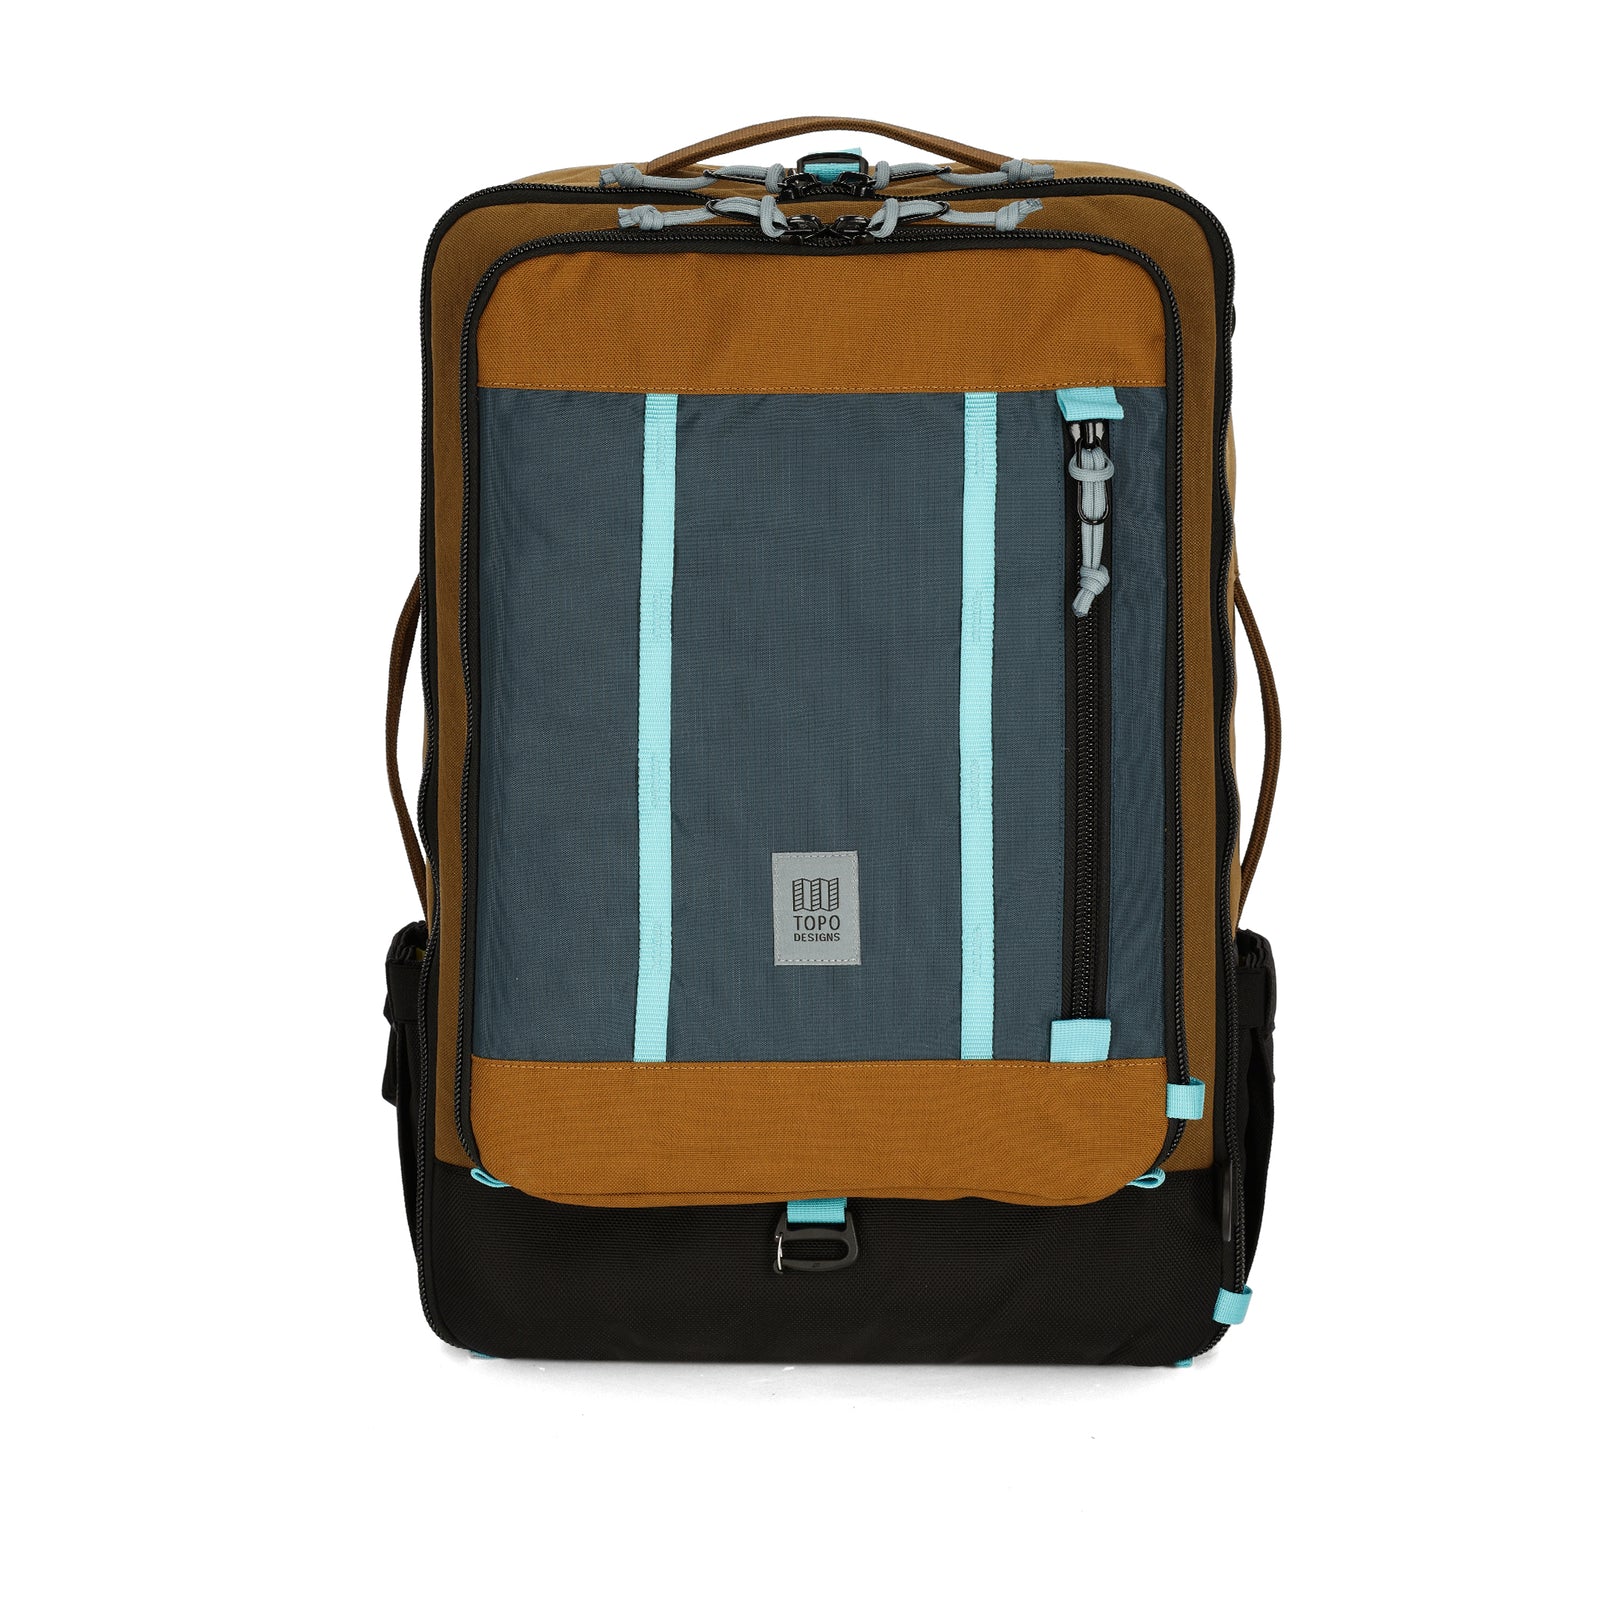 Topo Designs Global Travel Bag 40L Durable Carry On Convertible Laptop Travel Backpack in "Desert Palm / Pond Blue"